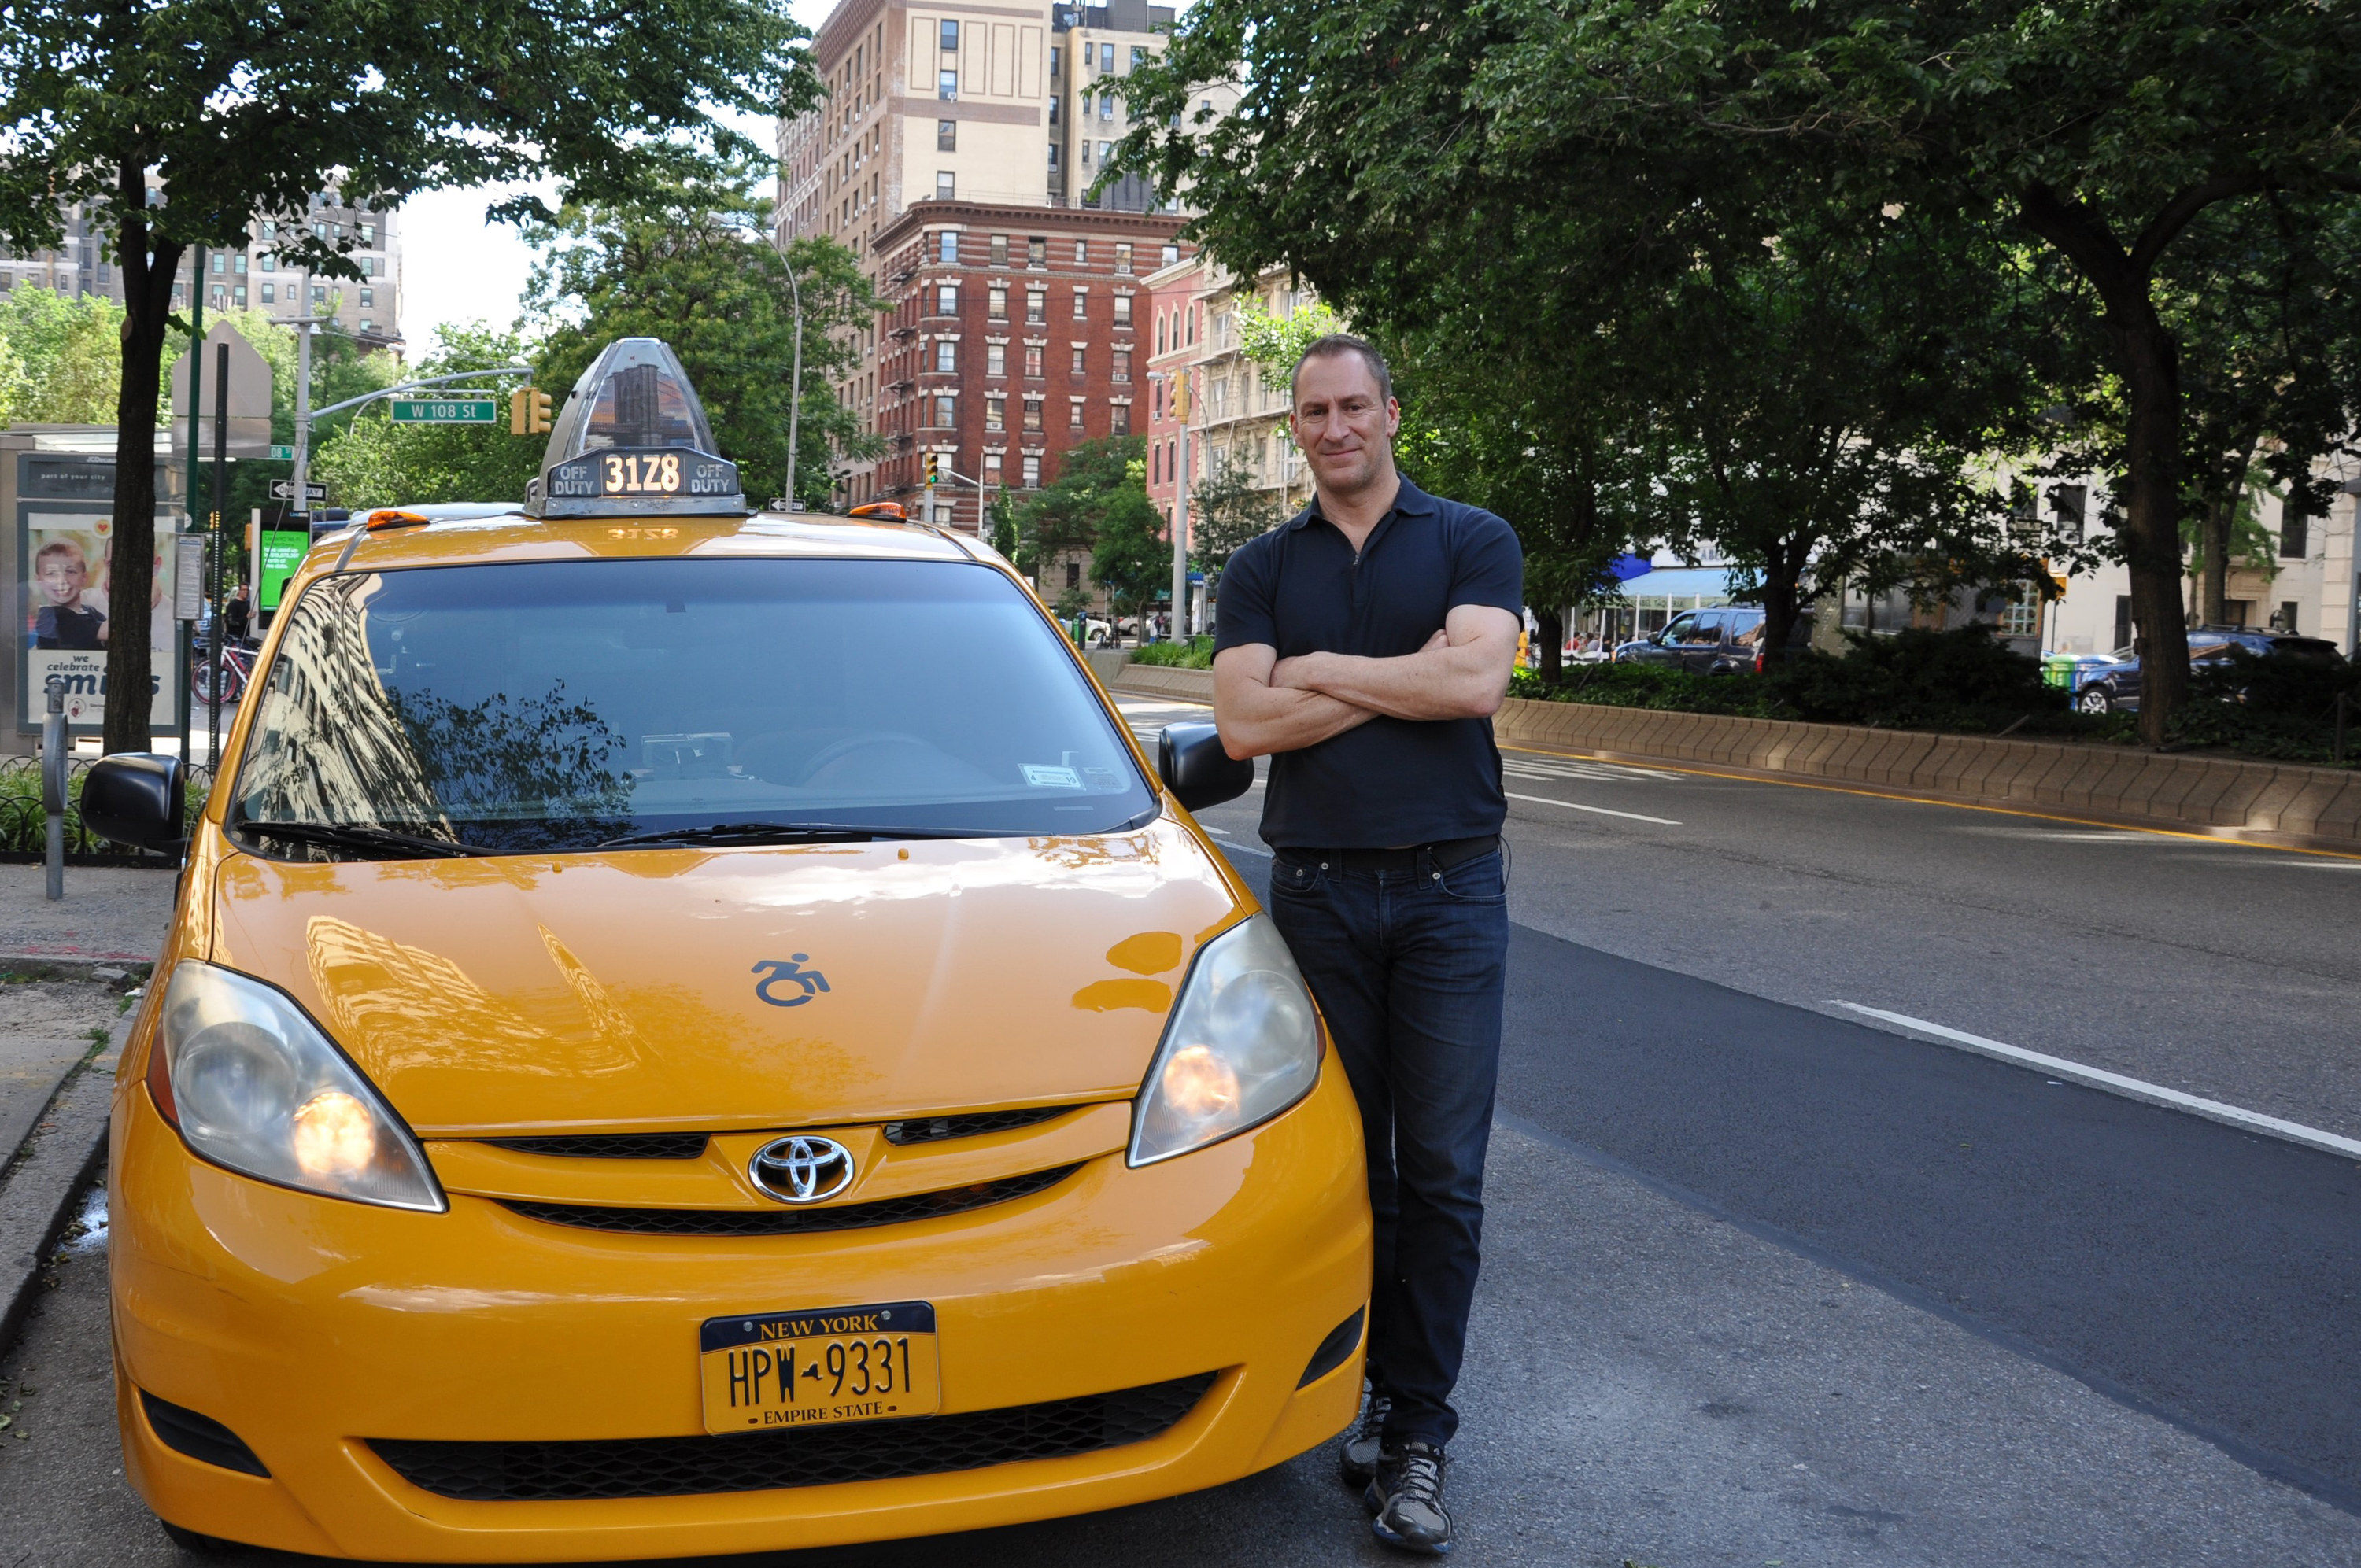 The new cash cab with Ben Bailey